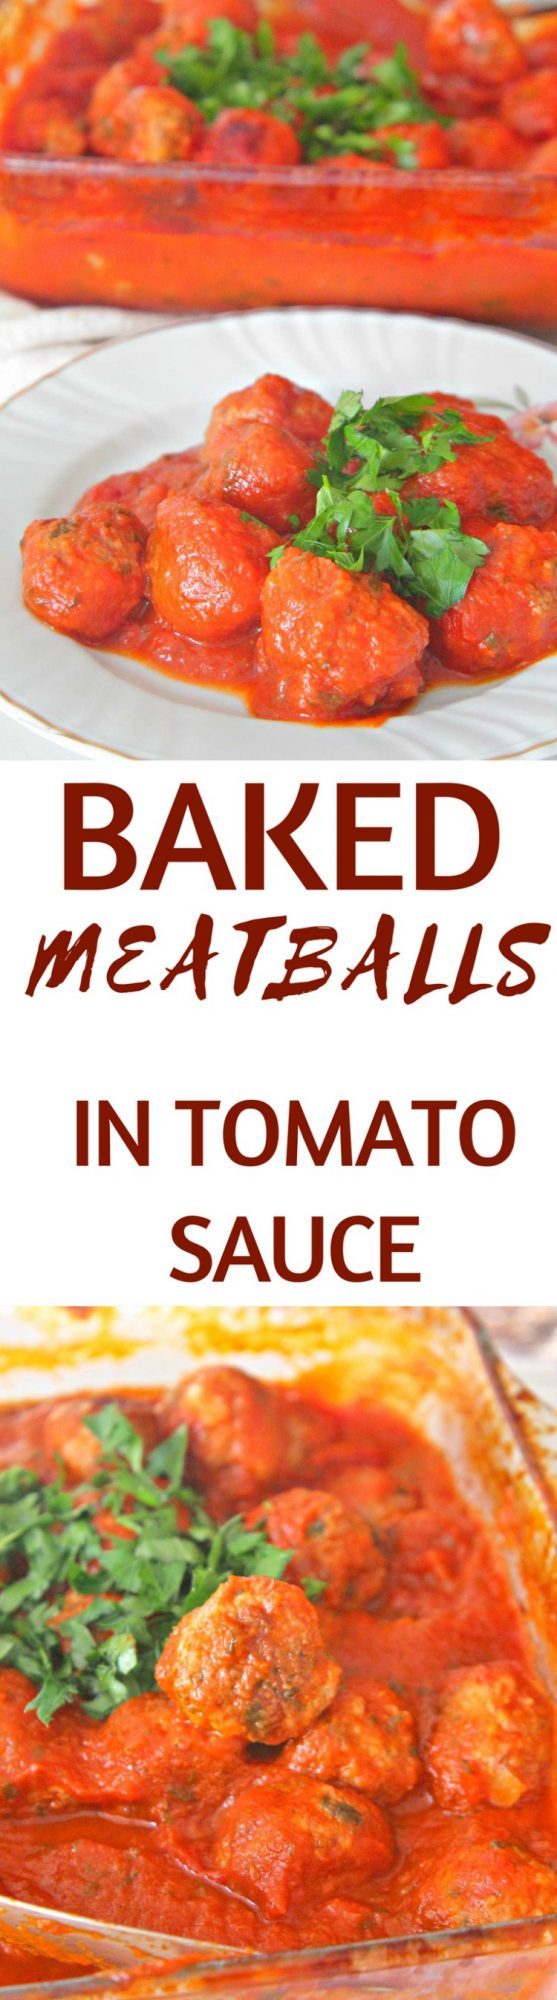 These amazing baked meatballs in sauce are insanely delicious and the perfect accompaniment to a pasta dish! Great comfort food, perfect winter meal!